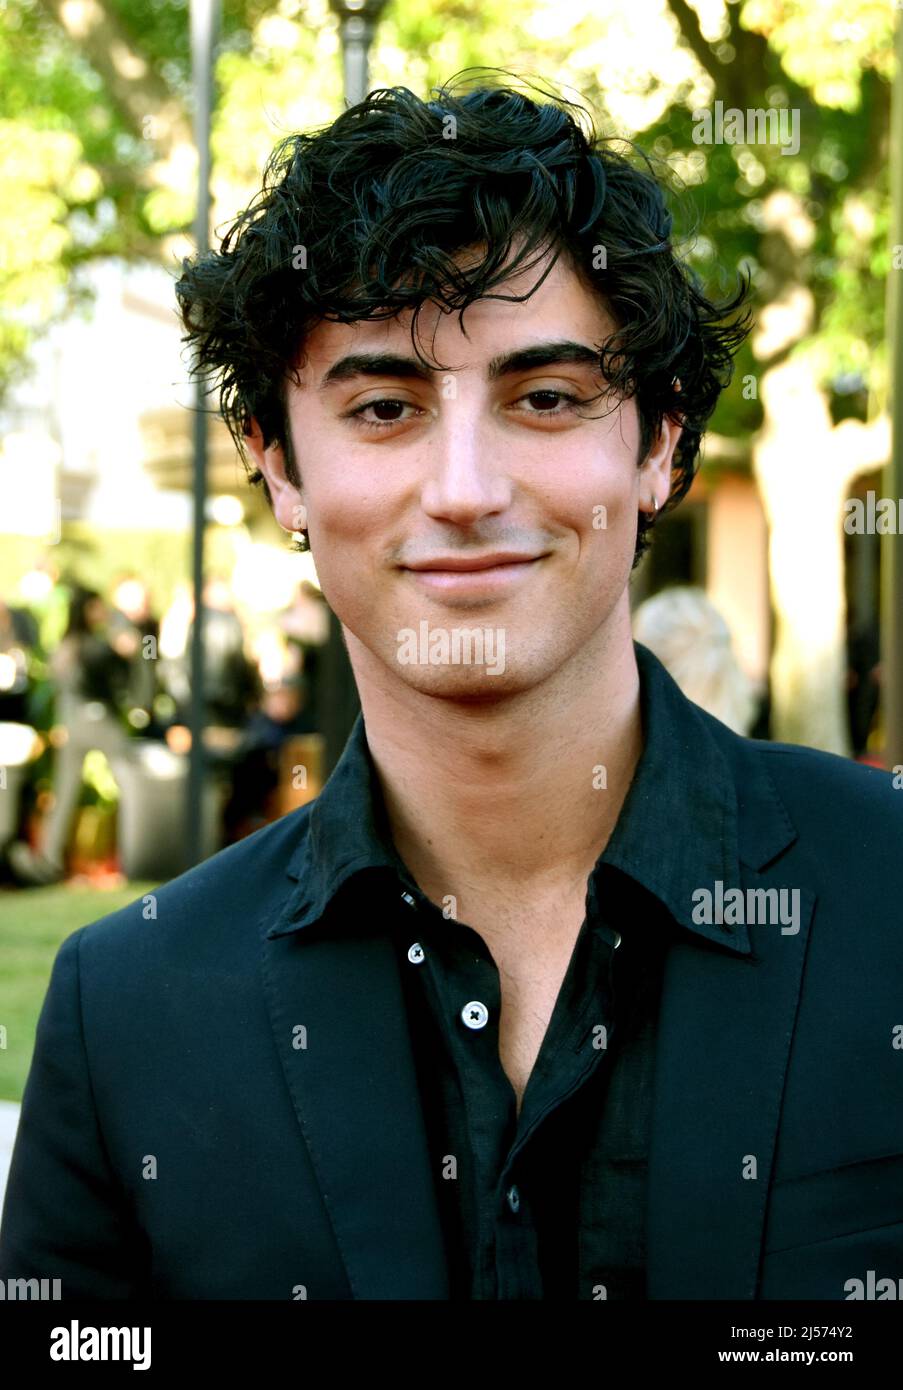 Los Angeles, California, USA 20th April 2022 Actor Anthony Ippolito attends  Paramount+ Premiere of 'The Offer' at Paramount Studios on April 20, 2022  in Los Angeles, California, USA. Photo by Barry King/Alamy